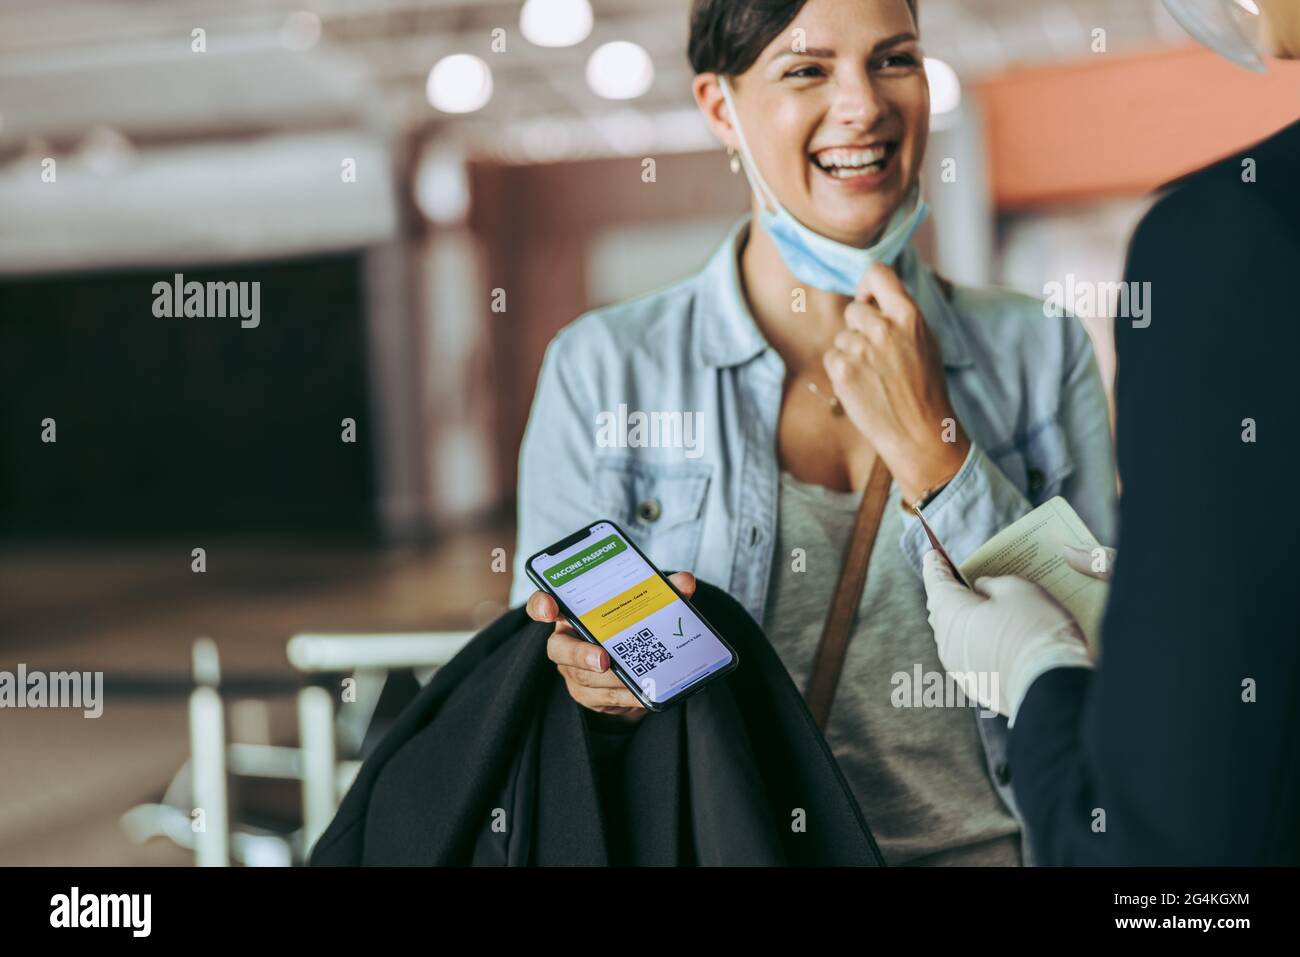 Smiling woman showing immunity passport to security at airport. Female at check-in counter showing her vaccine passport to the airline attendant. Stock Photo